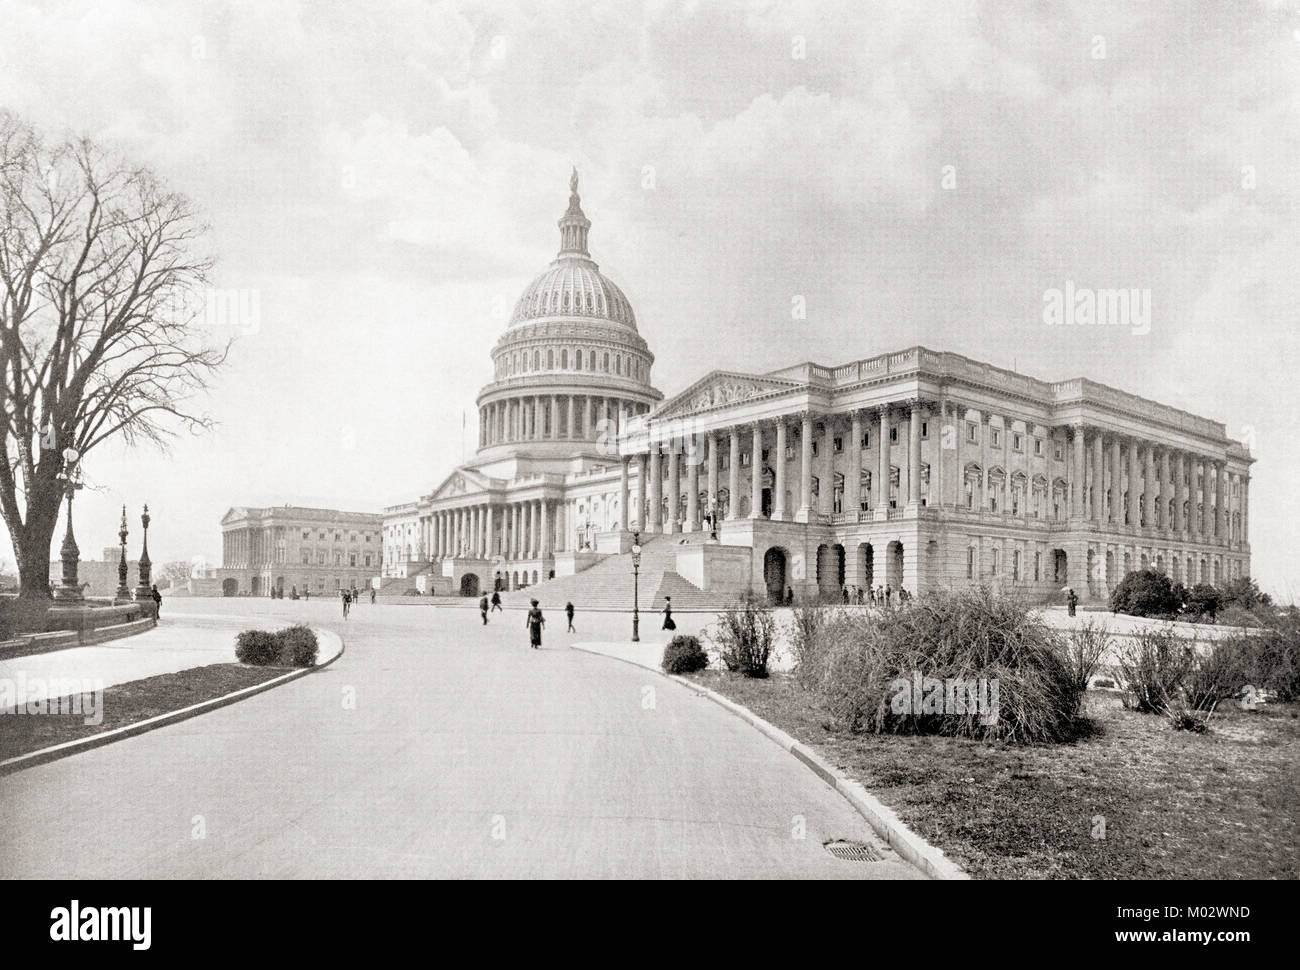 The United States Capitol, aka Capitol Building, Washington D.C., United States of America, seen here c.1911.  From The Wonders of the World, published c.1911. Stock Photo